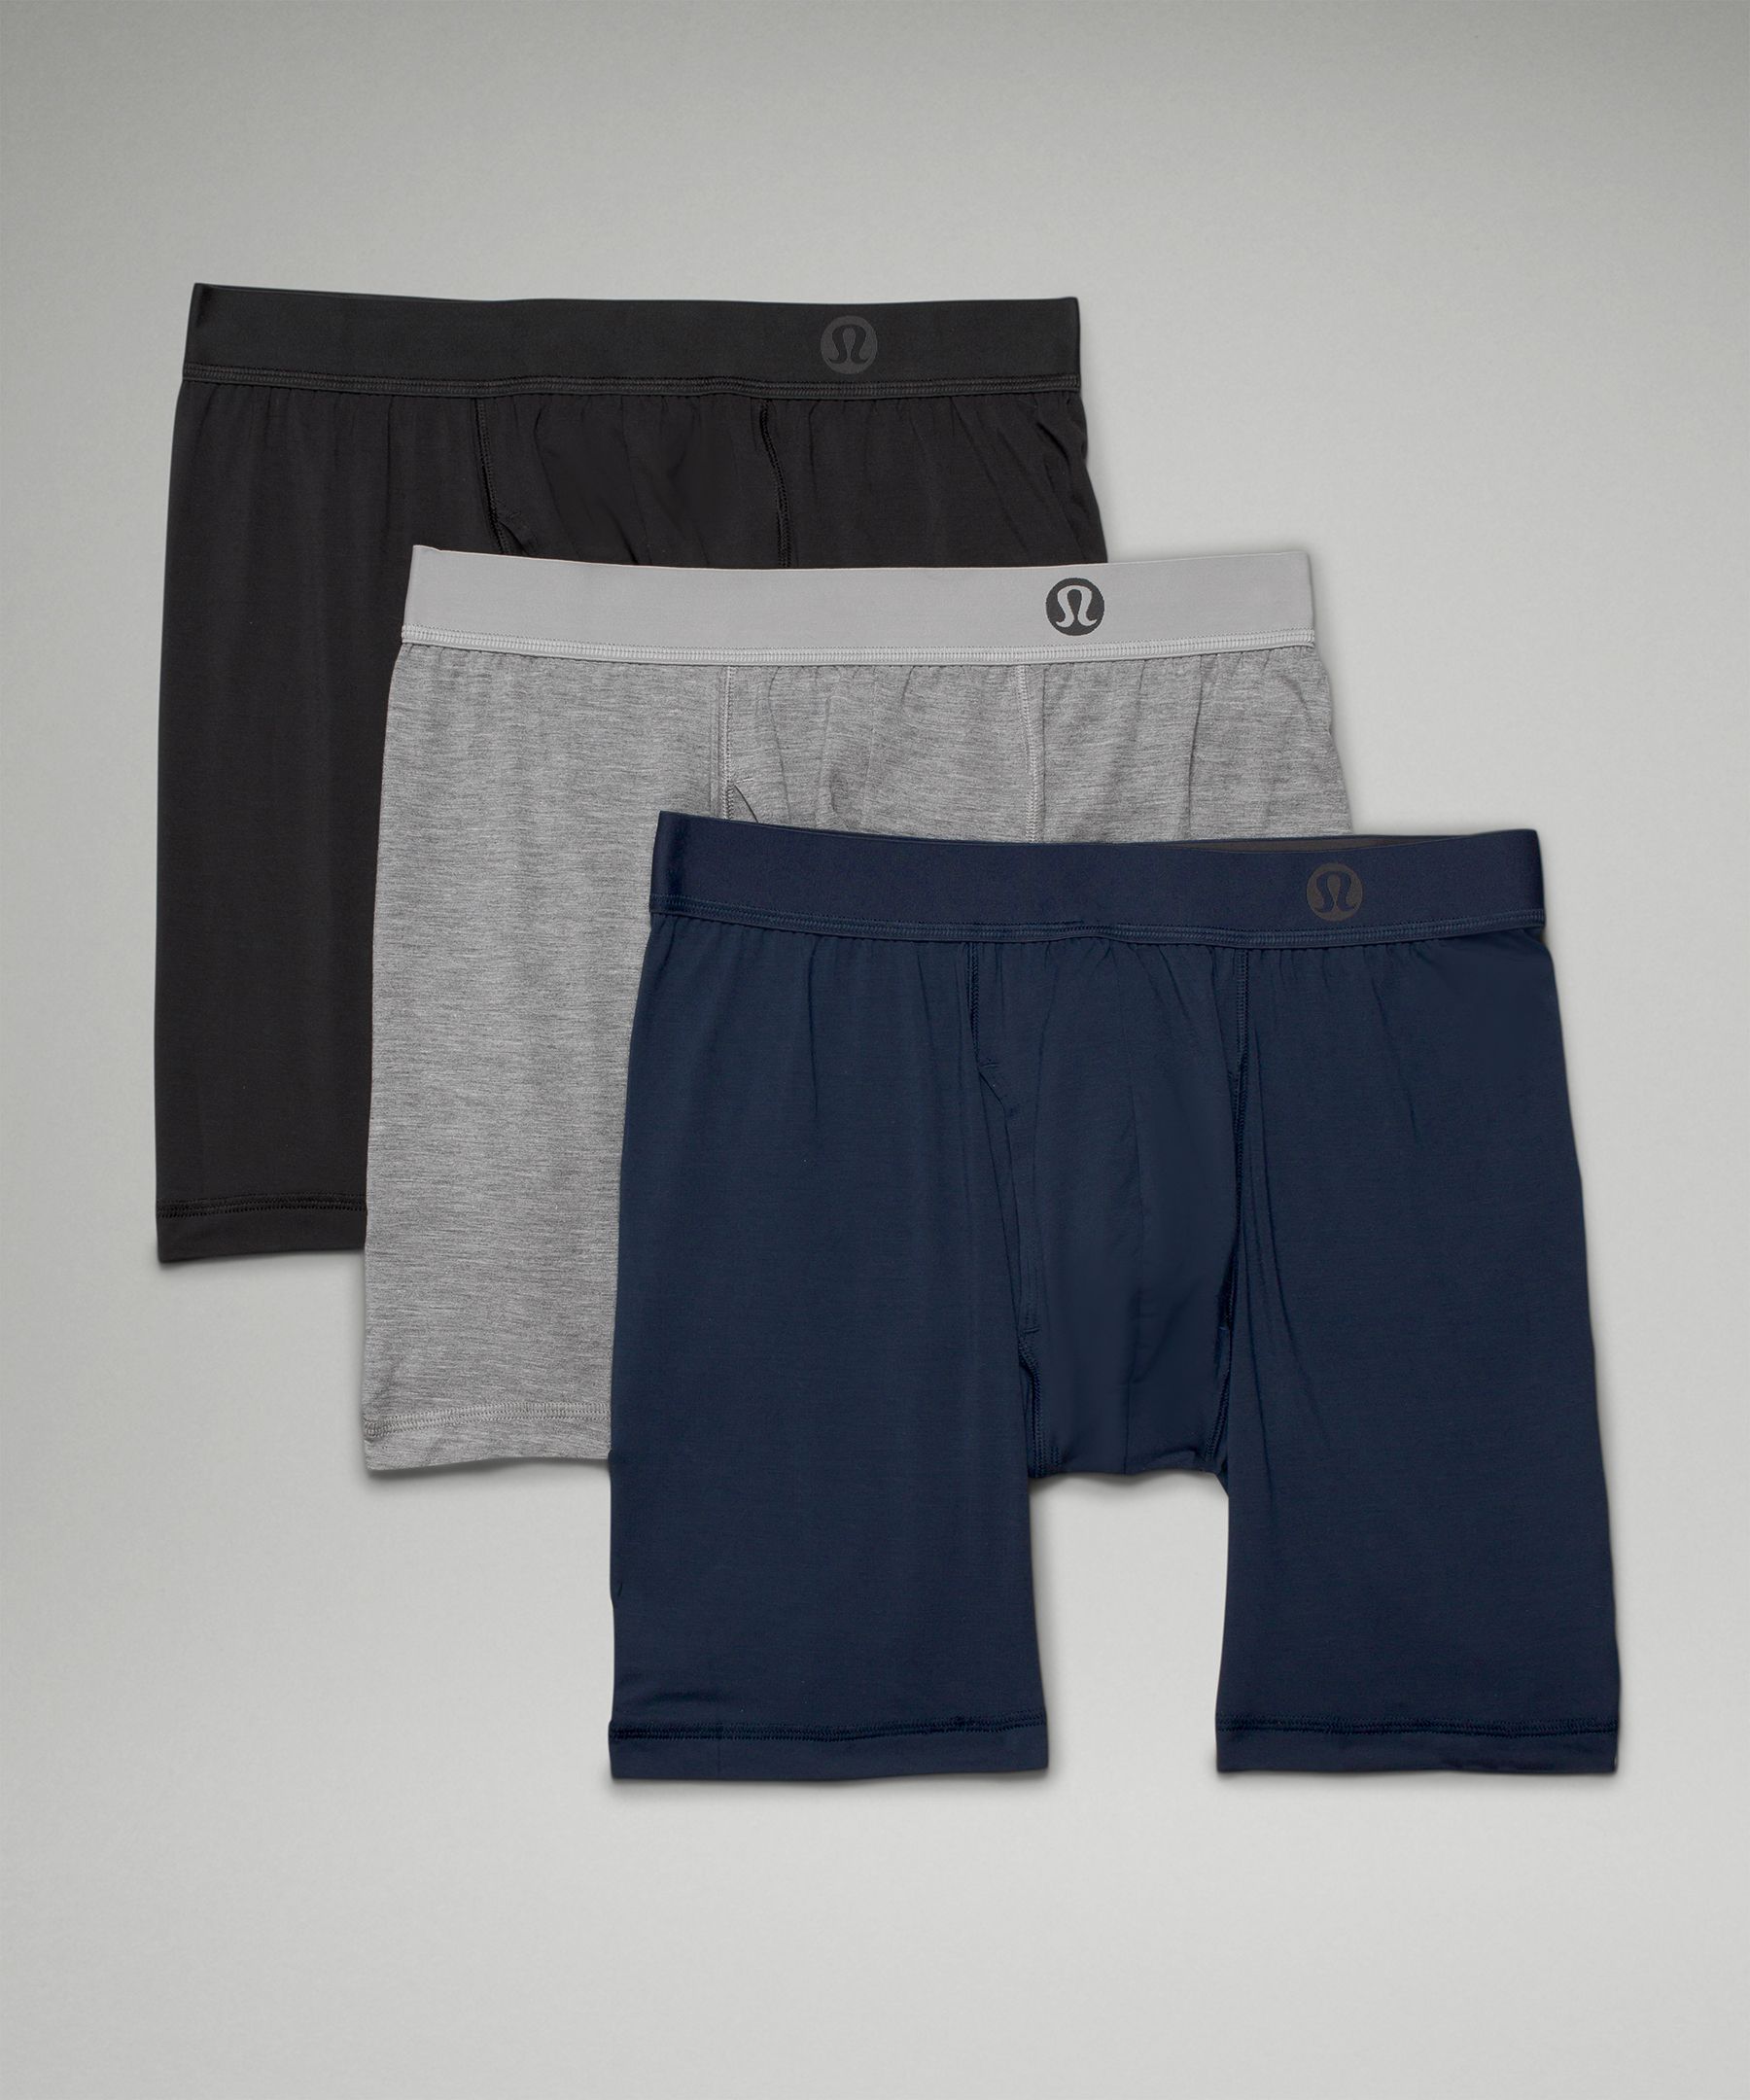 Lululemon Always In Motion Long Boxer with Fly 7